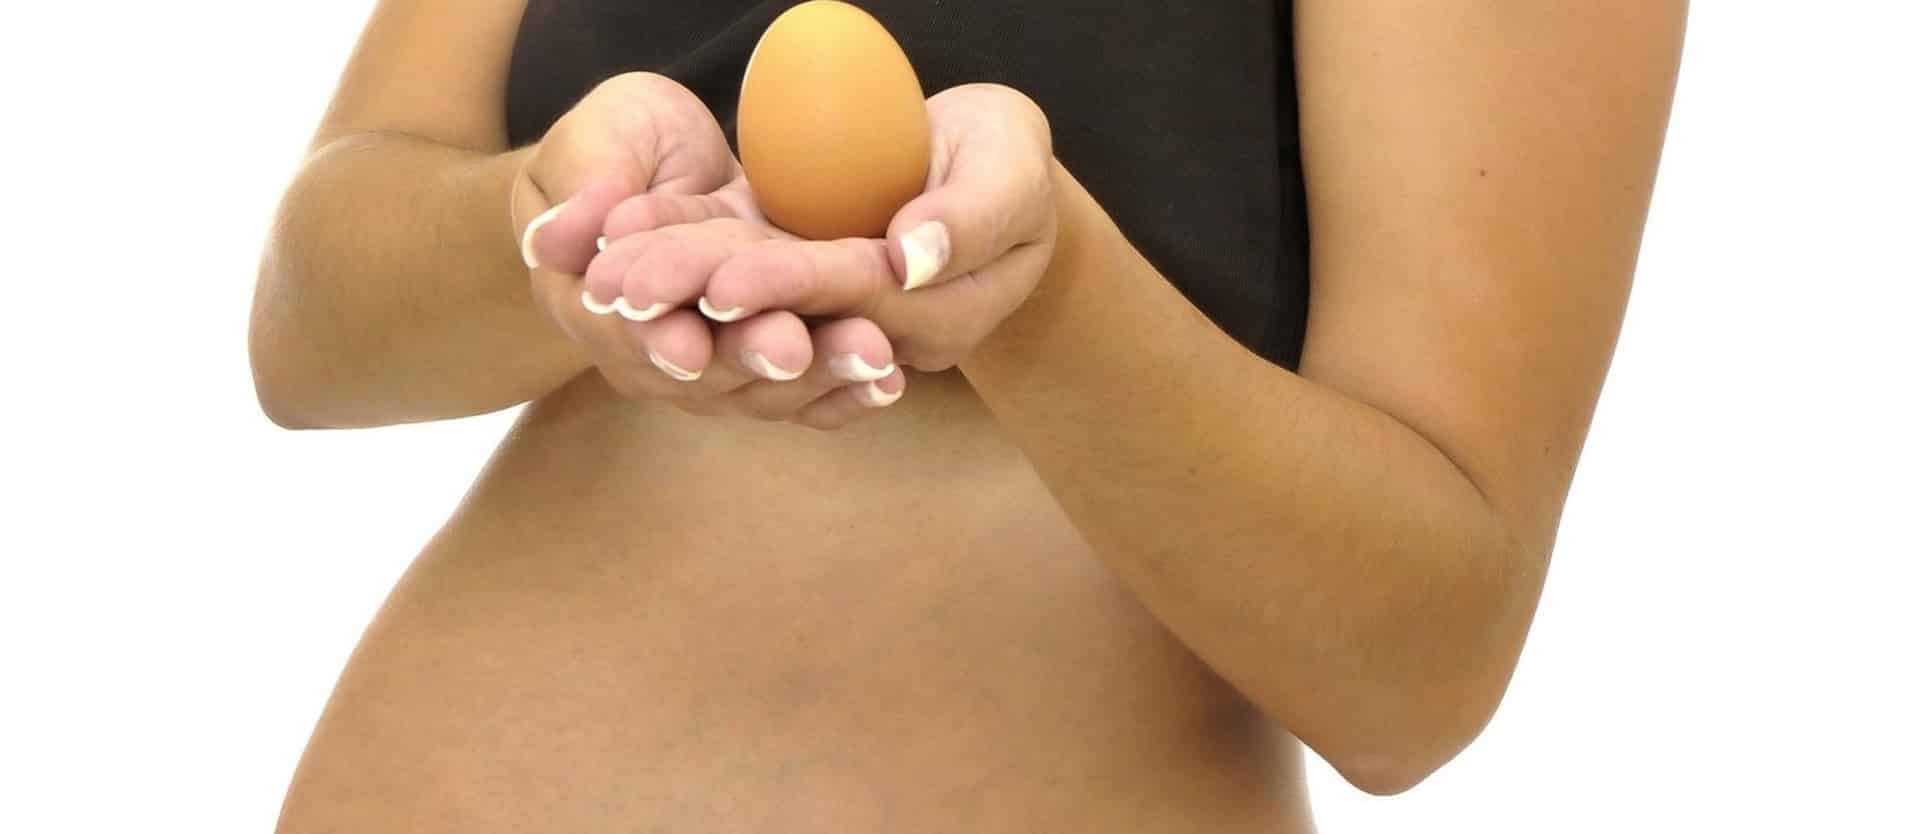 Bacon, Eggs, and Gestational Diabetes During Pregnancy